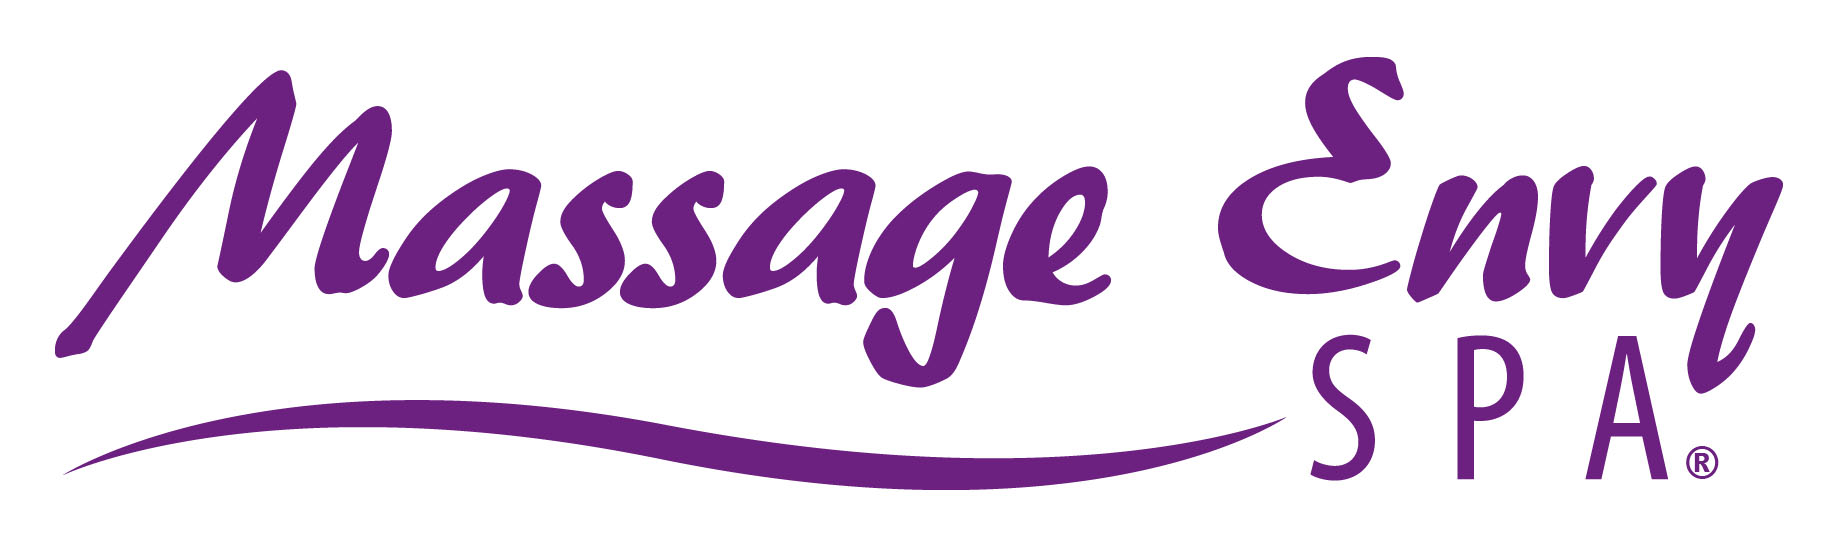 Massage Envy Spa to Open First Location in New York City in Early 2014, MASSAGE Magazine